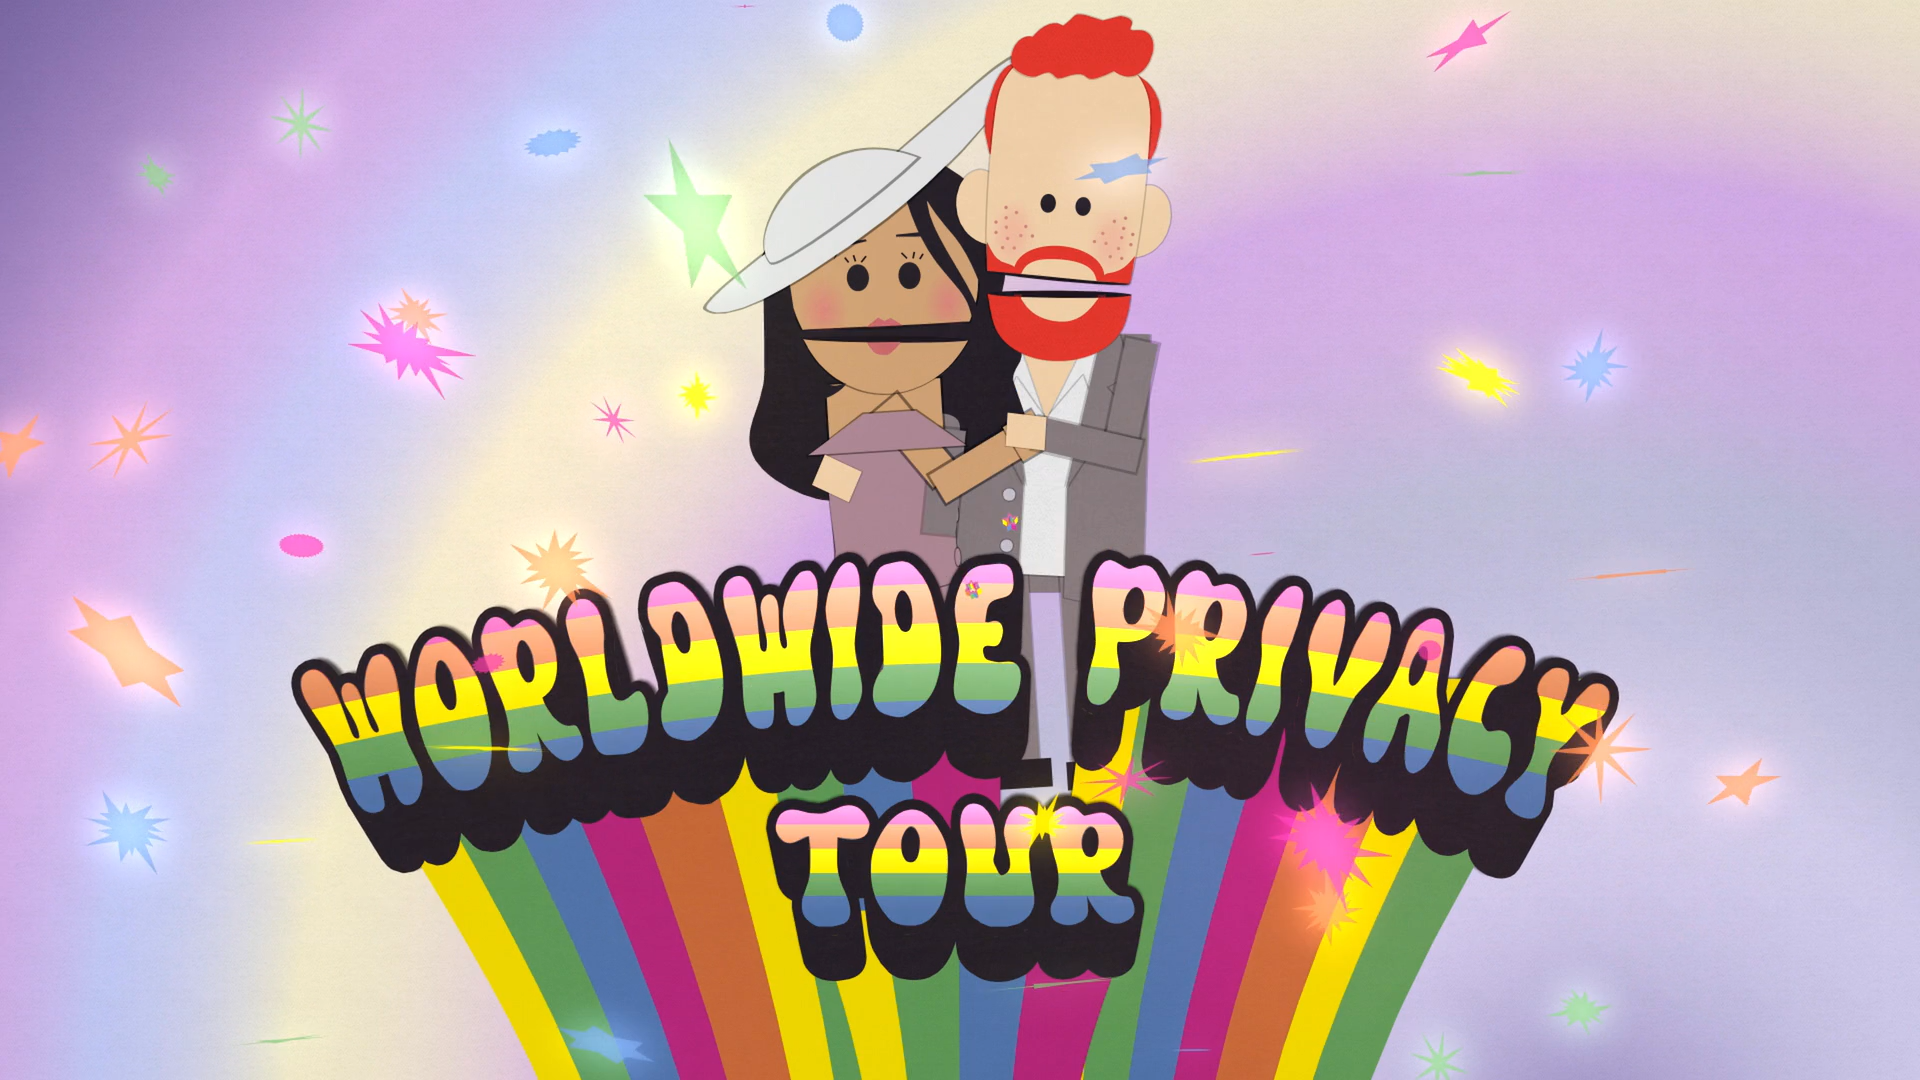 South Park The Worldwide privacy tour Kyle hallway song 